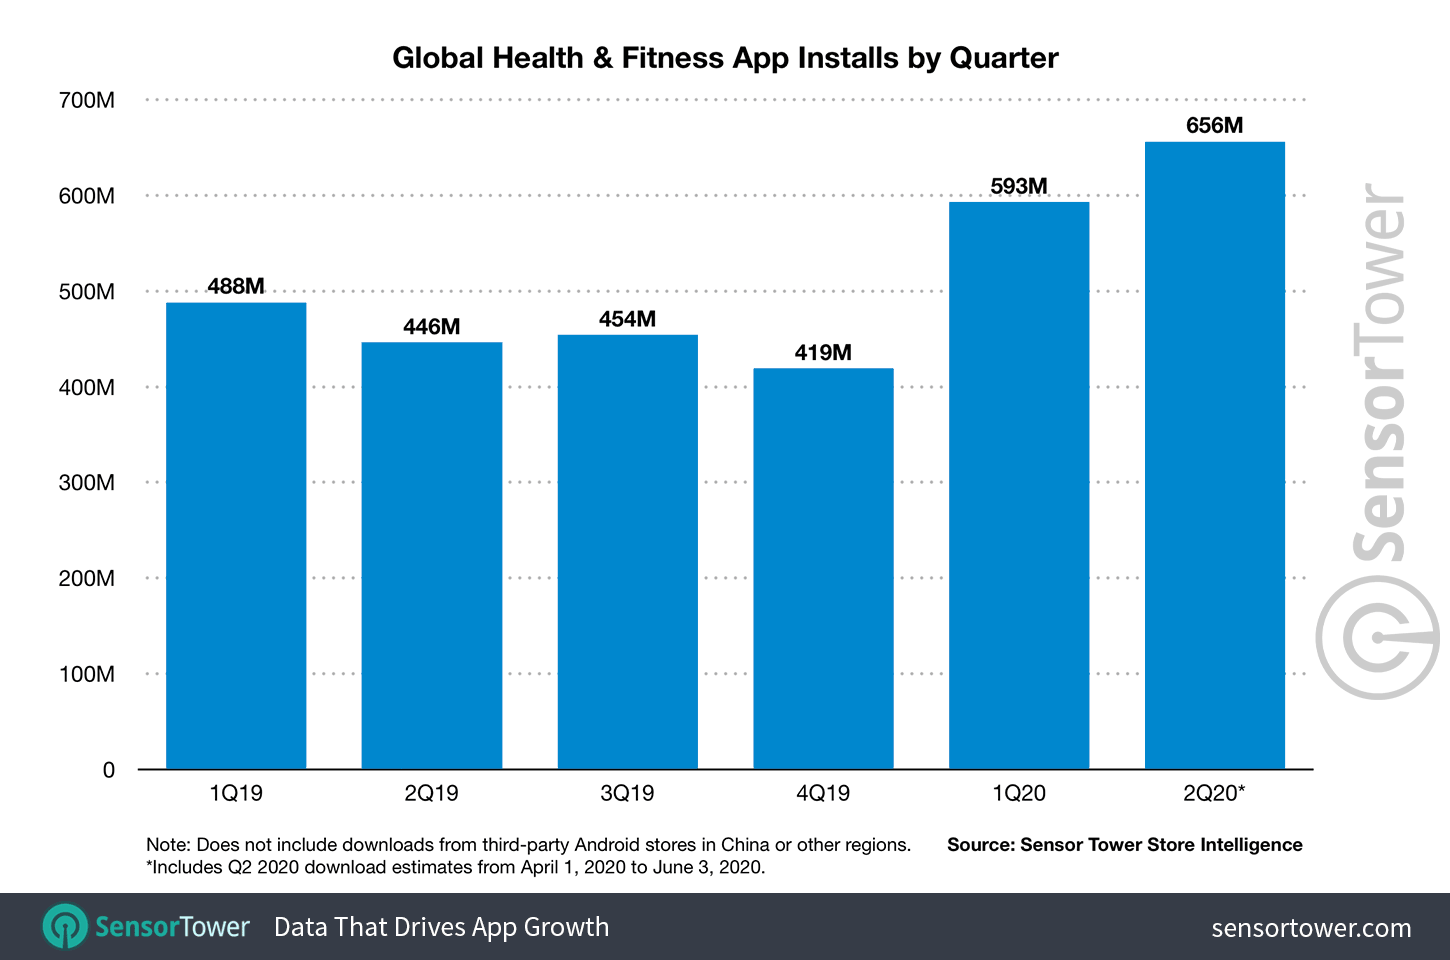 Global health and fitness app installs by quarter 2020